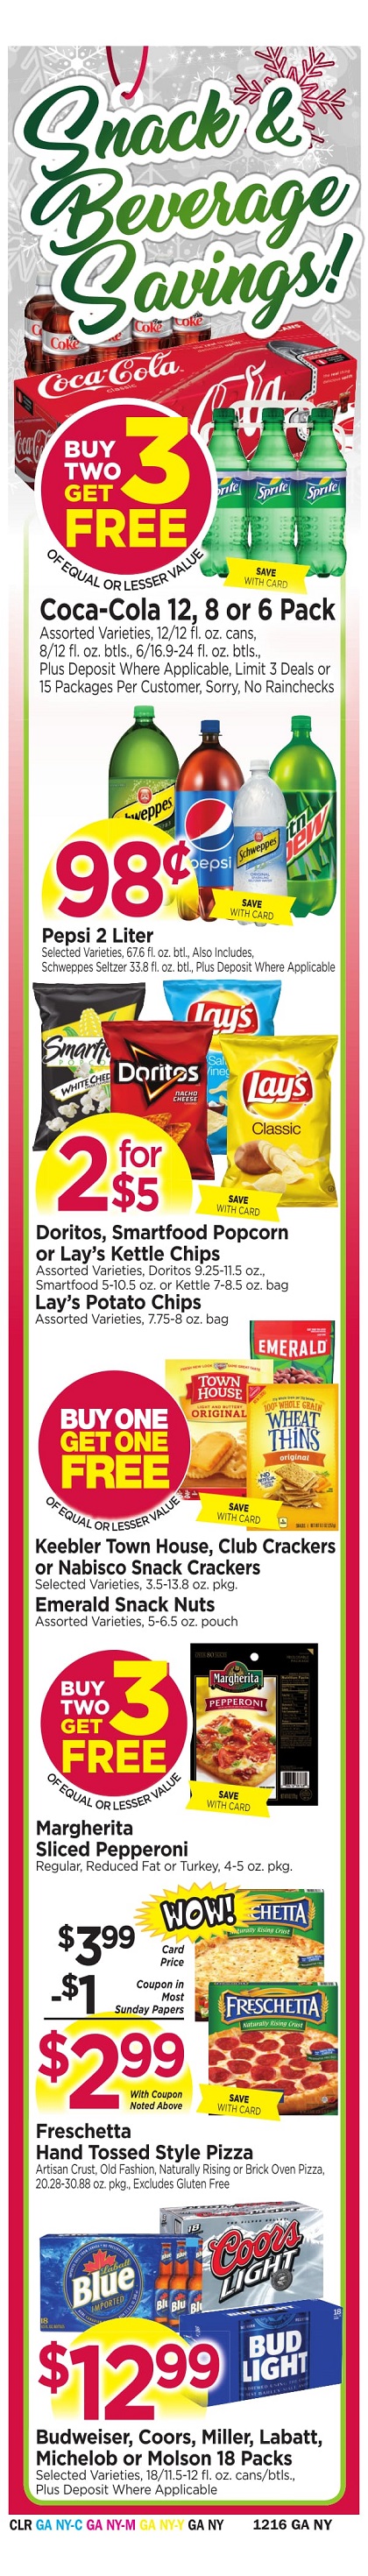 Tops Markets Ad Preview Week 12 10 Wrap